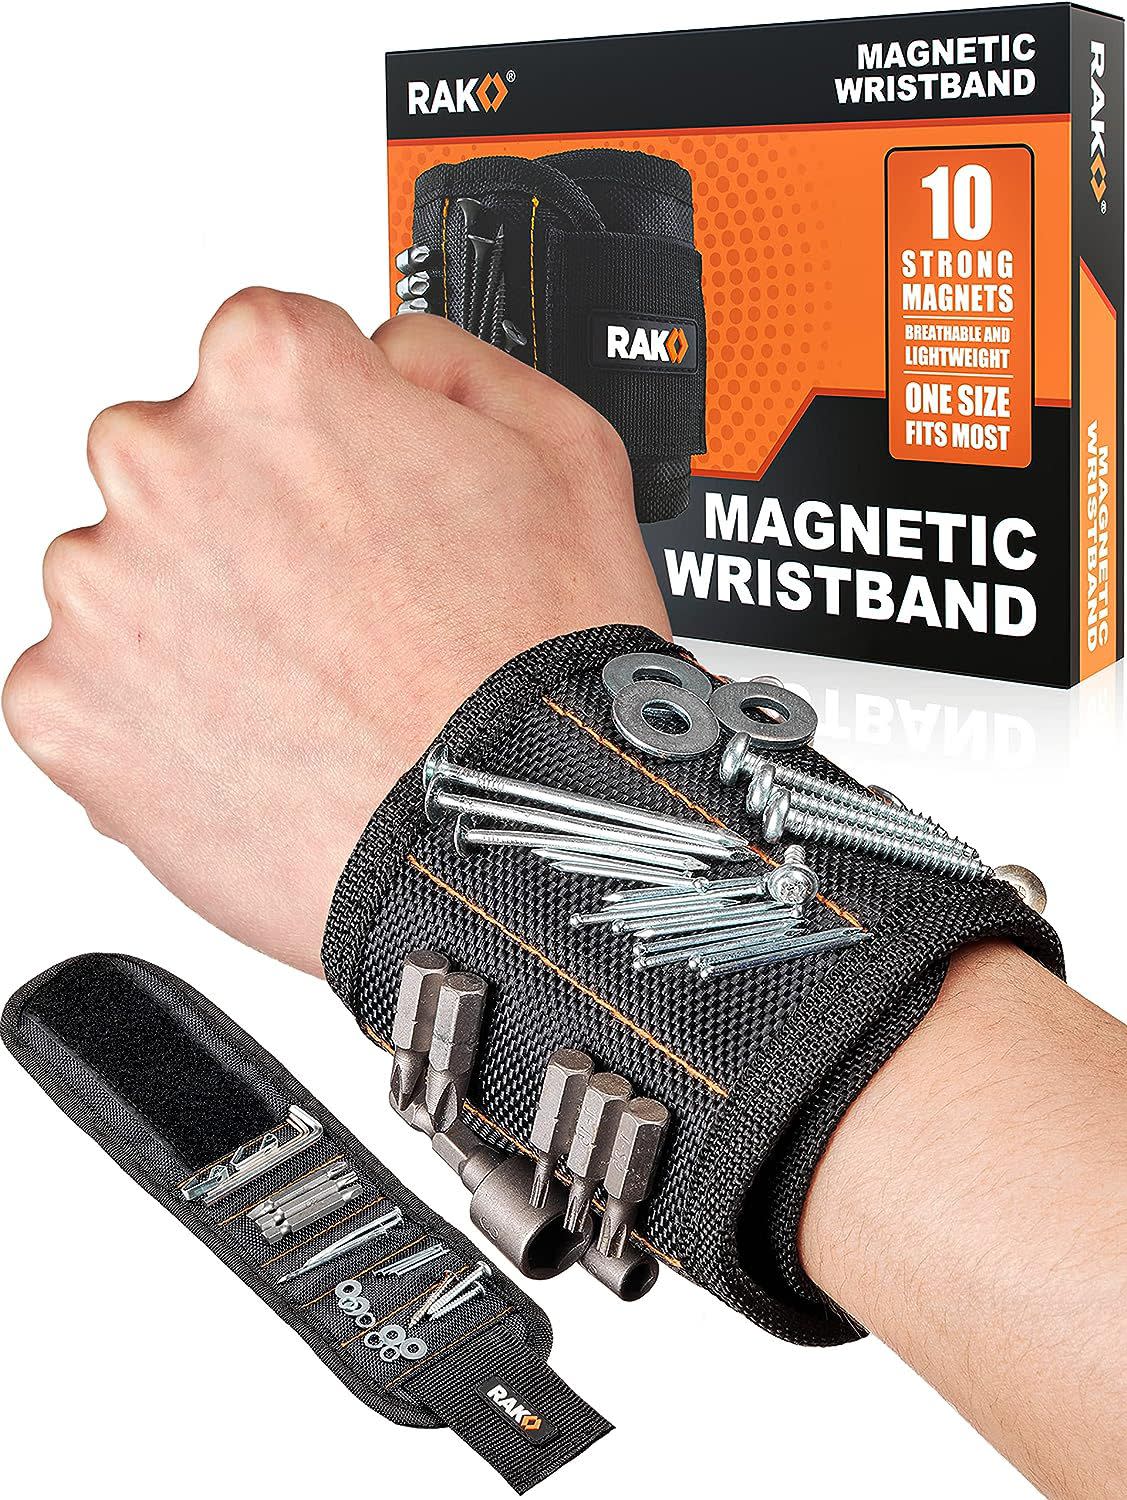 RAK Magnetic Wristband for Holding Screws, Nails, and Drill Bits